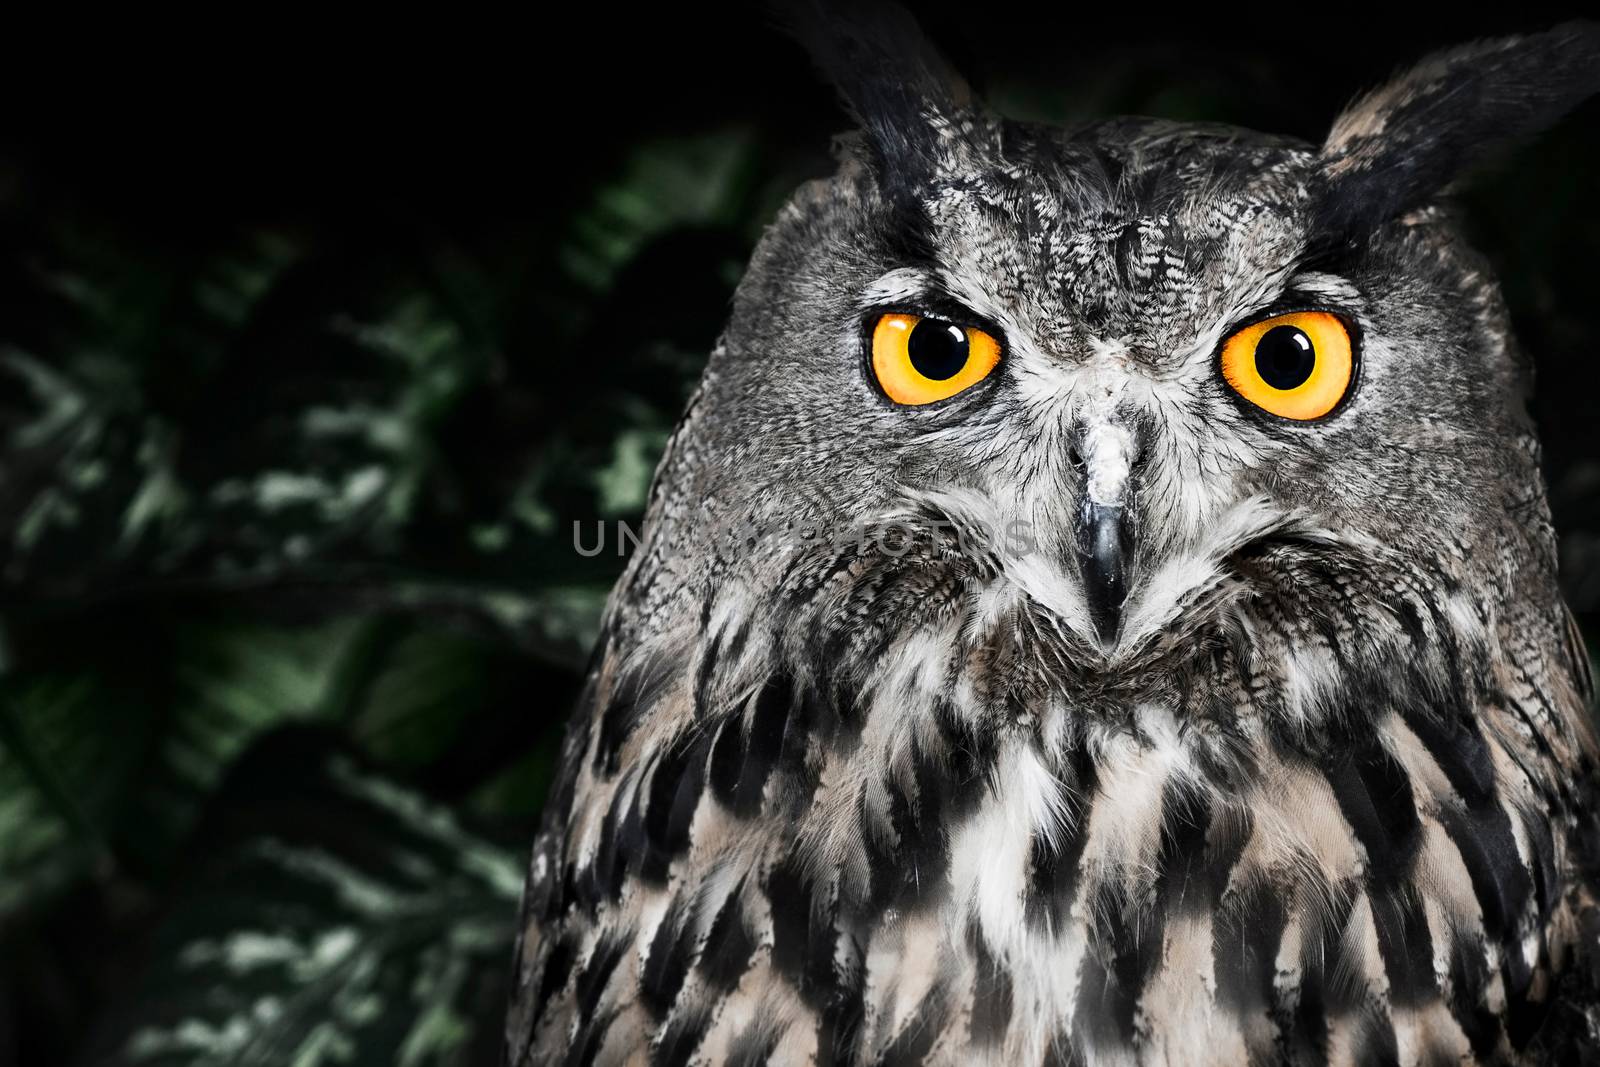 The evil eyes. ( Eagle Owl, Bubo bubo). by asiandelight